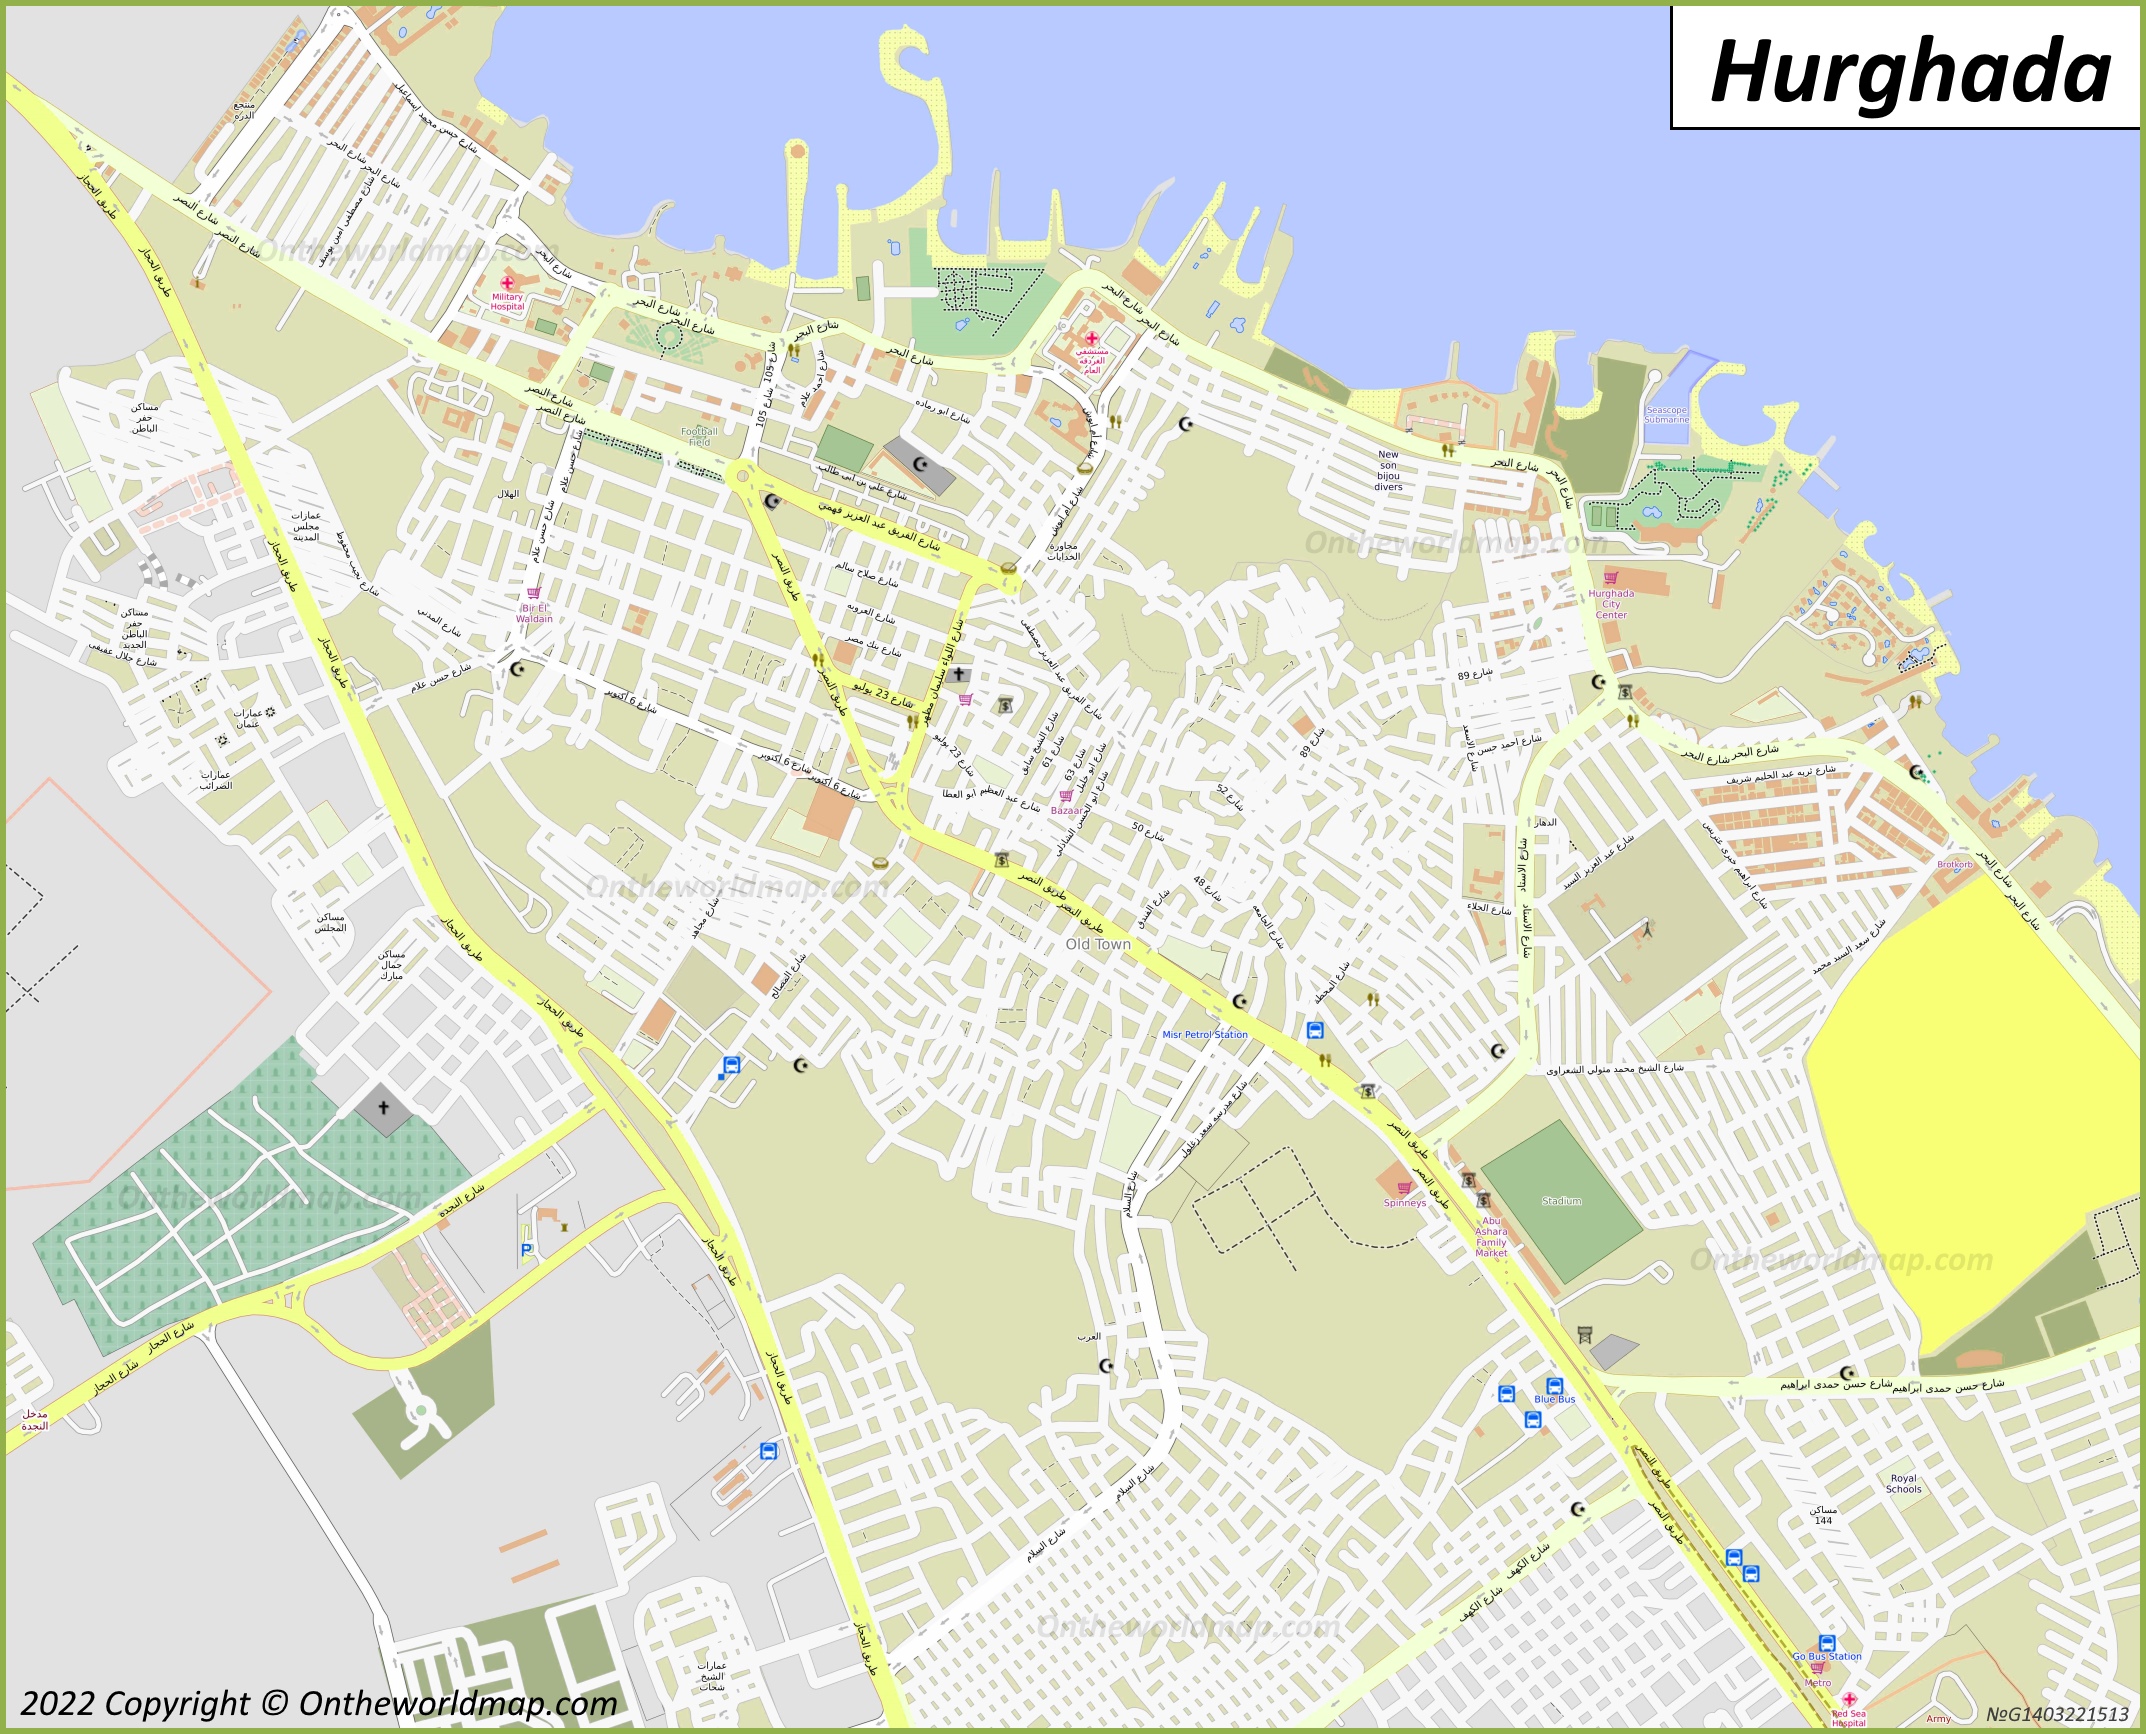 Hurghada Old Town Map